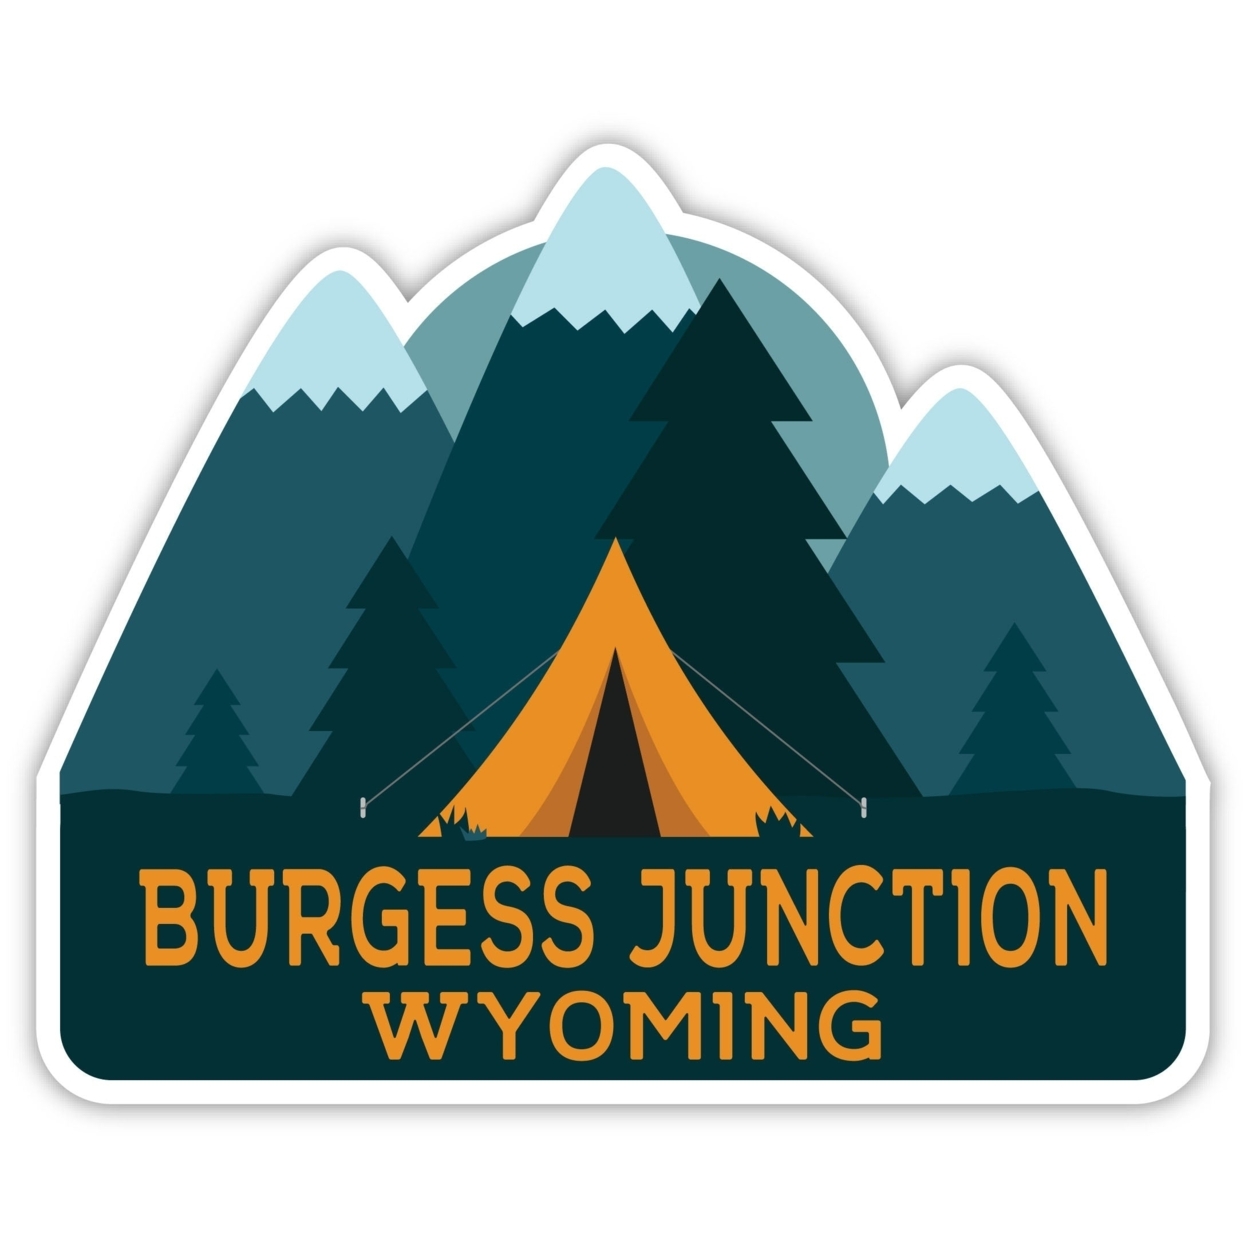 Burgess Junction Wyoming Souvenir Decorative Stickers (Choose Theme And Size) - 4-Pack, 6-Inch, Tent